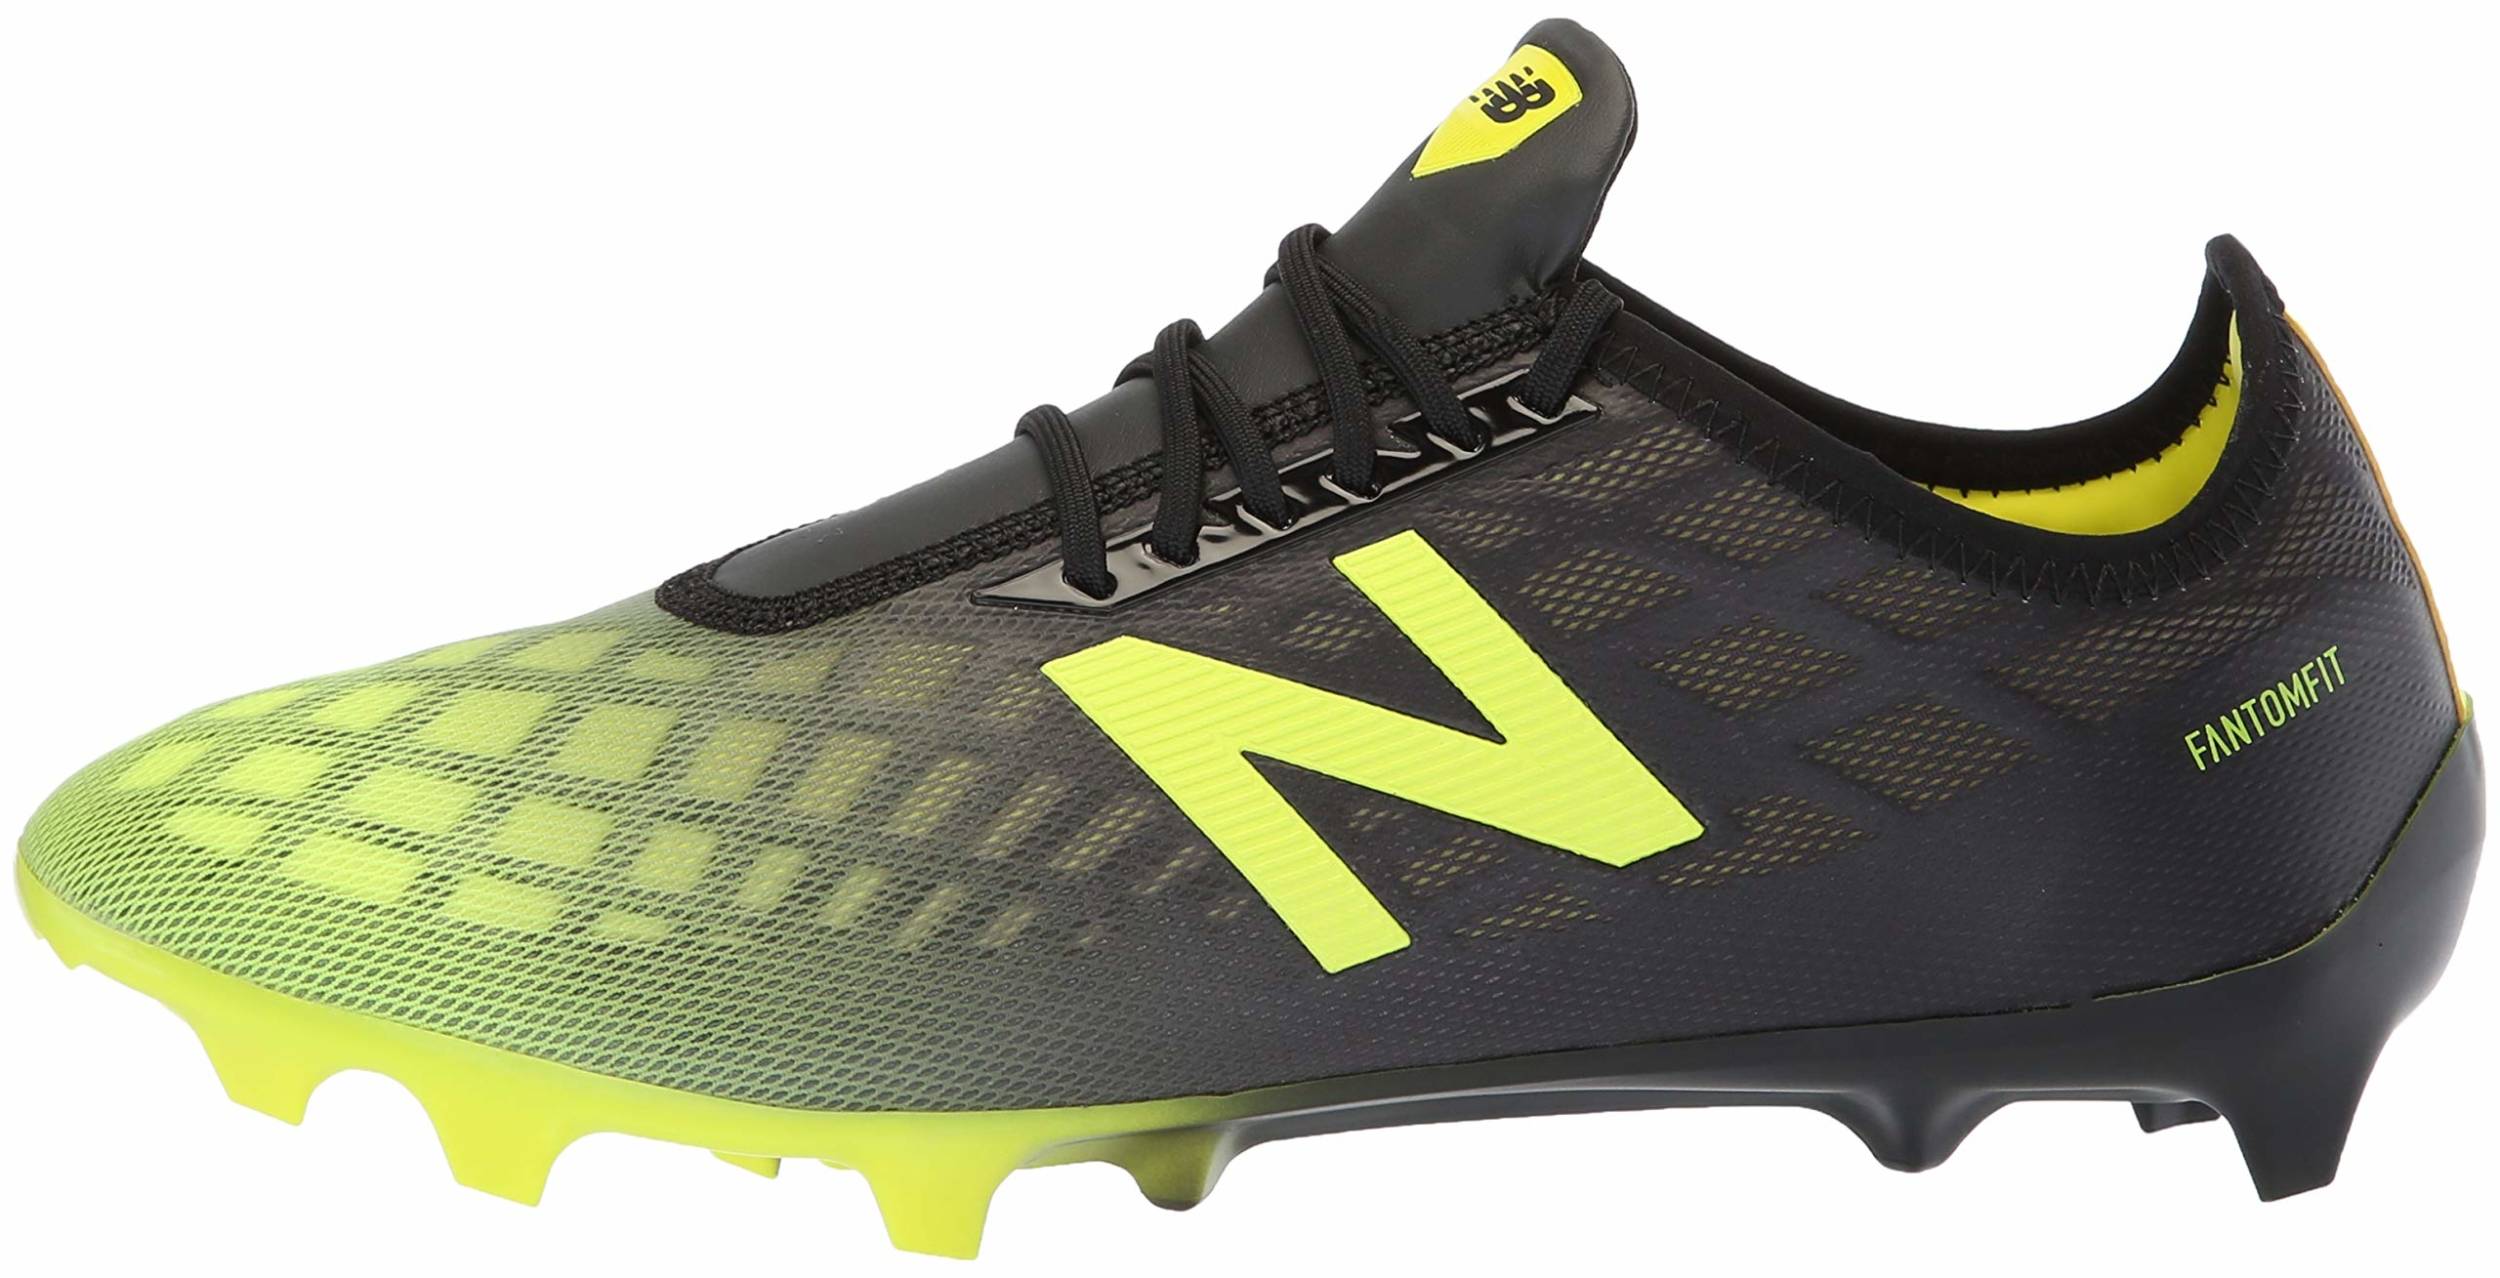 Save 50% on Green Soccer Cleats (66 